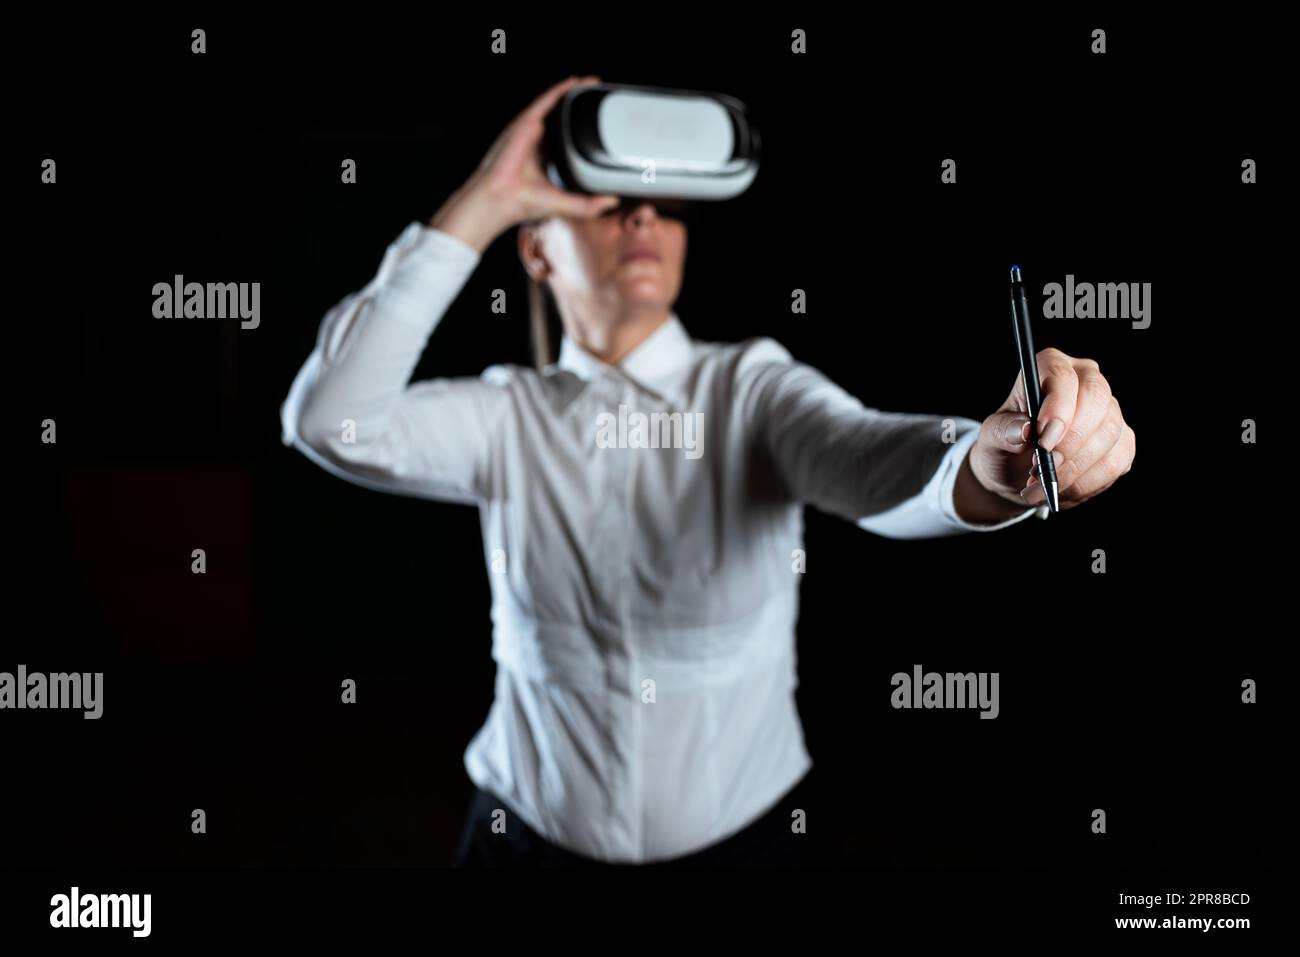 Businesswoman Wearing Virtual Reality Simulator And Holding Pen. Woman Wearing Vr Headset While Attending Professional Training Through Modern Technology. Stock Photo